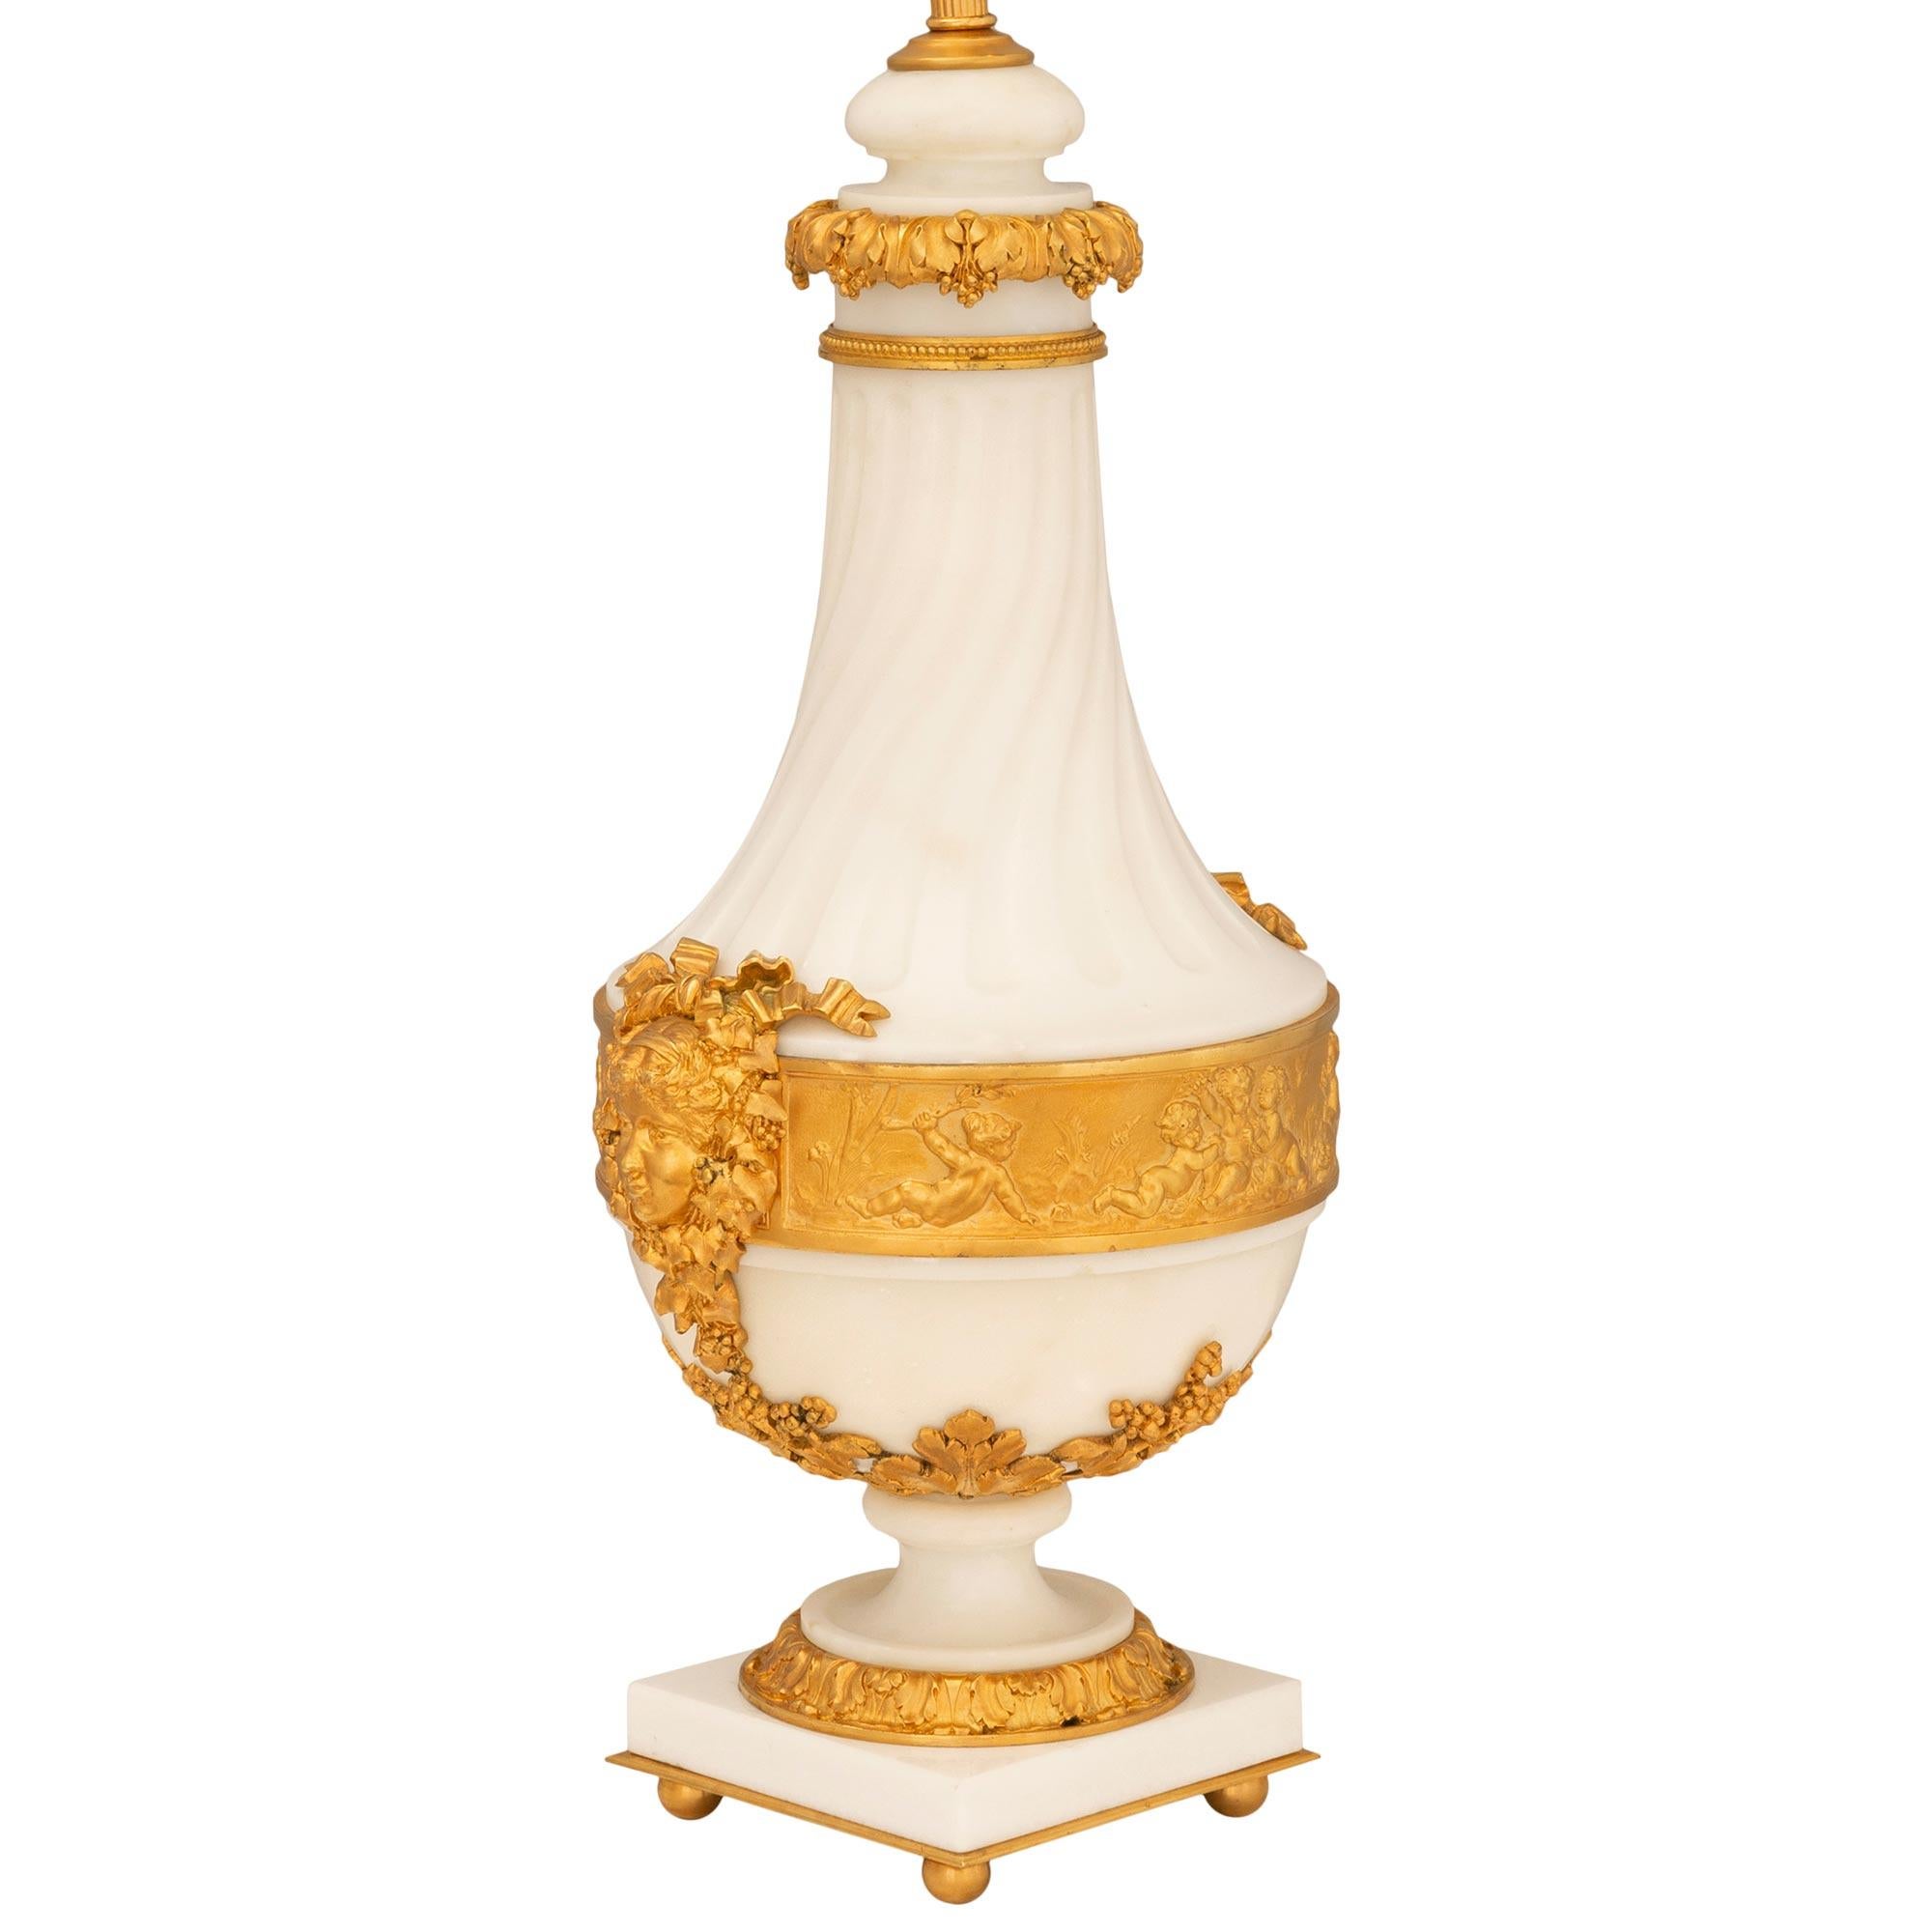 An extraordinary and very high quality pair of French 19th century Louis XVI st. white Carrara marble and ormolu lamps. Each lamp is raised by a square white Carrara marble base with elegant ball feet, a fine ormolu fillet, and a beautiful wrap